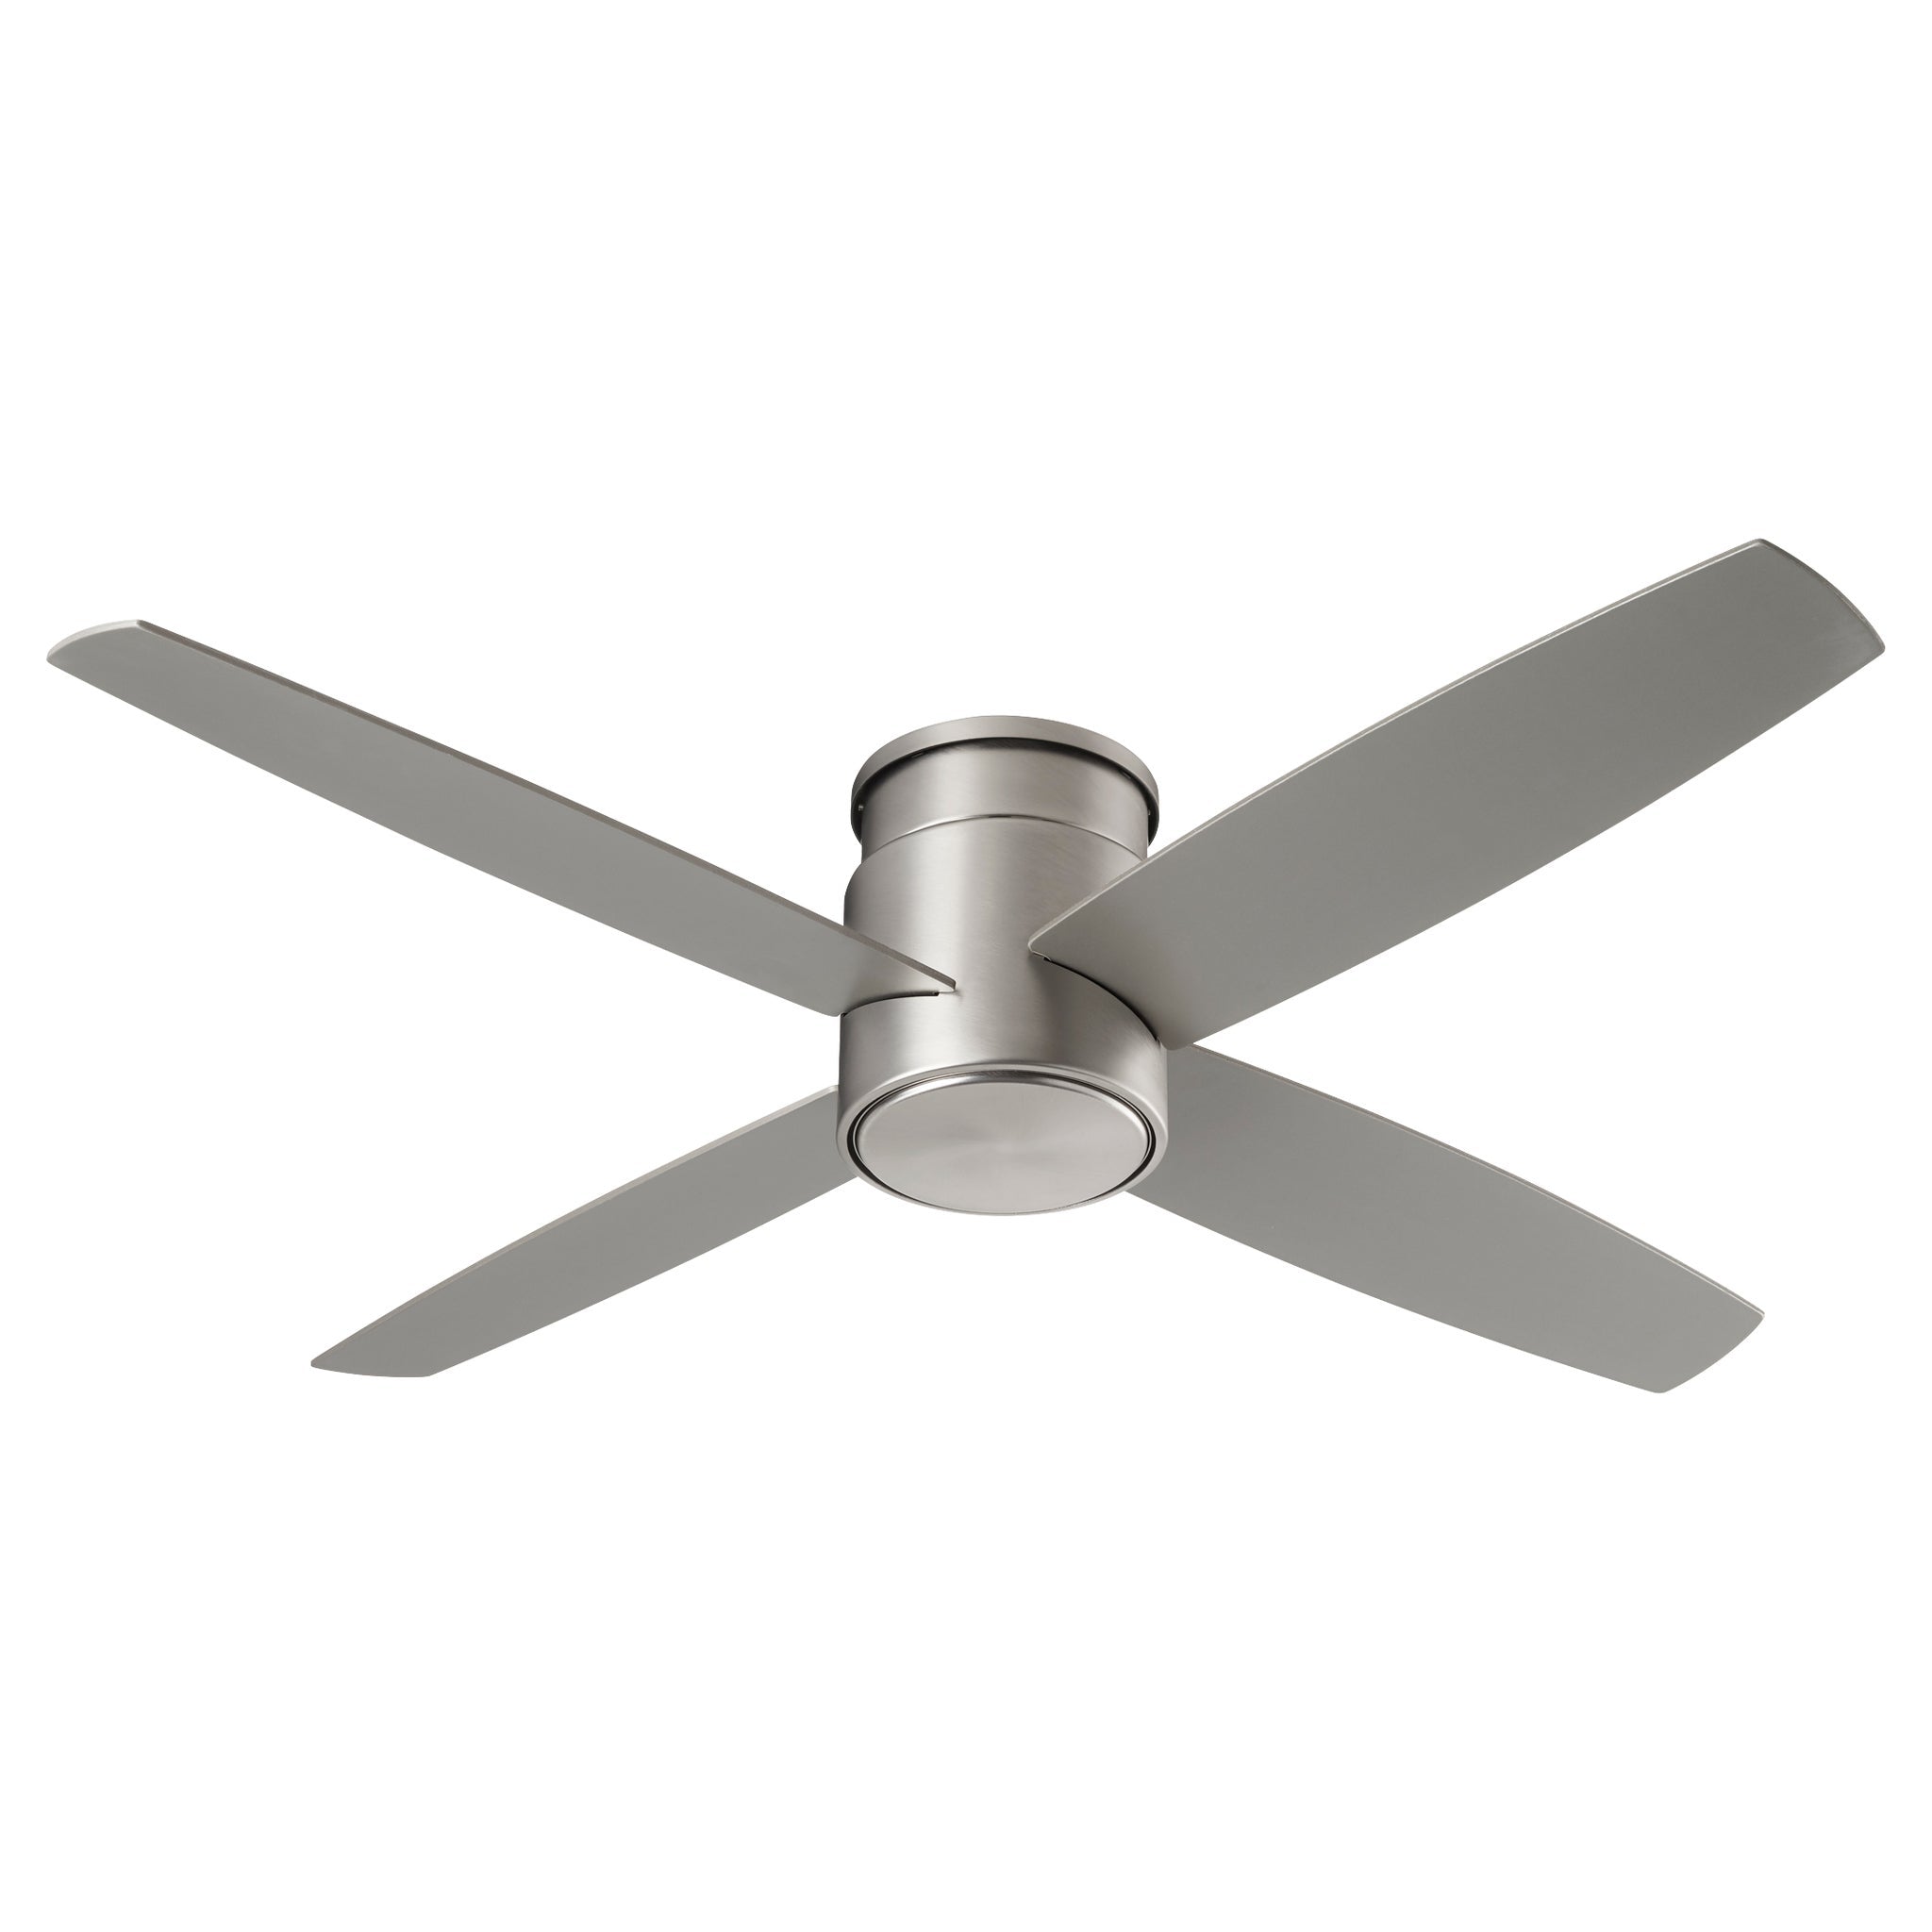 Oxygen OSLO HUGGER 52 Inch Ceiling Fan with Remote, LED Light Optional - 3-102-X